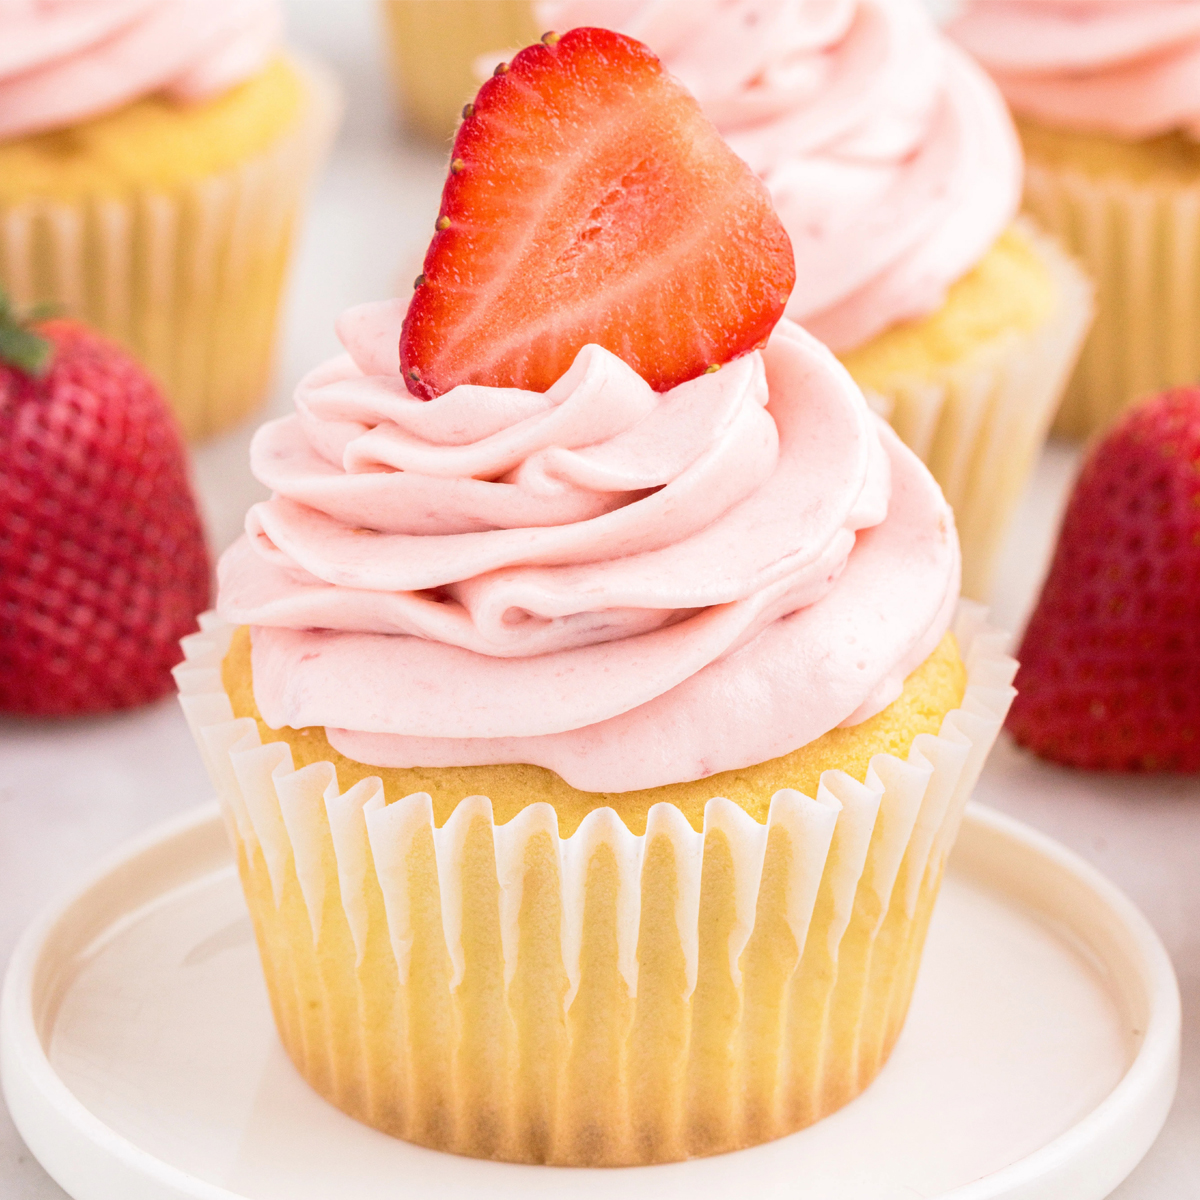 Strawberry-Cream-Cheese-Frosting